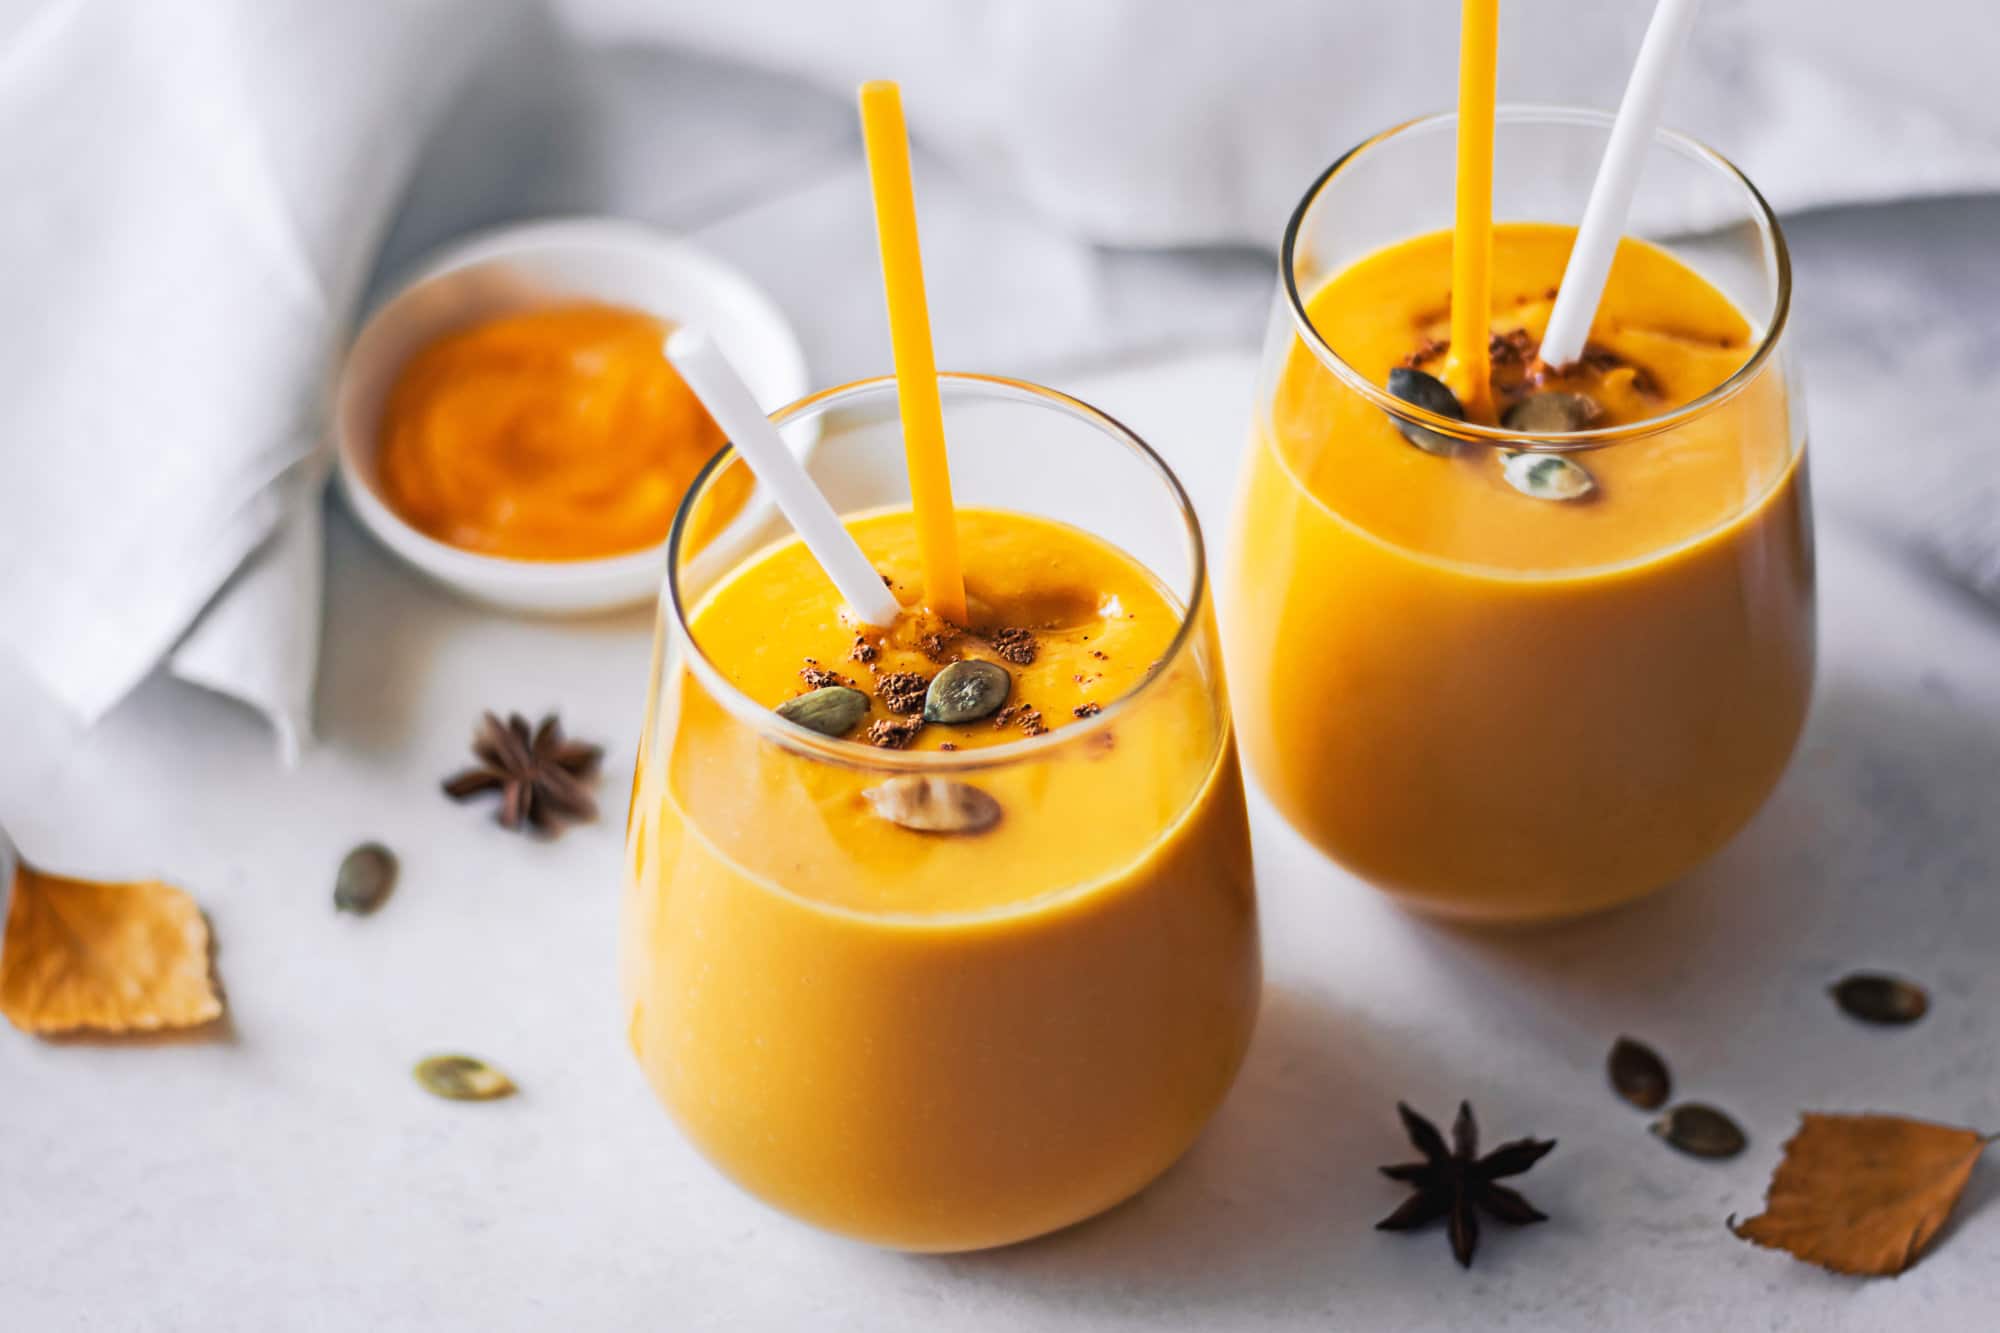 Pumpkin smoothie in a glass cup with a straw and topped with pumpkin seeds and spices.